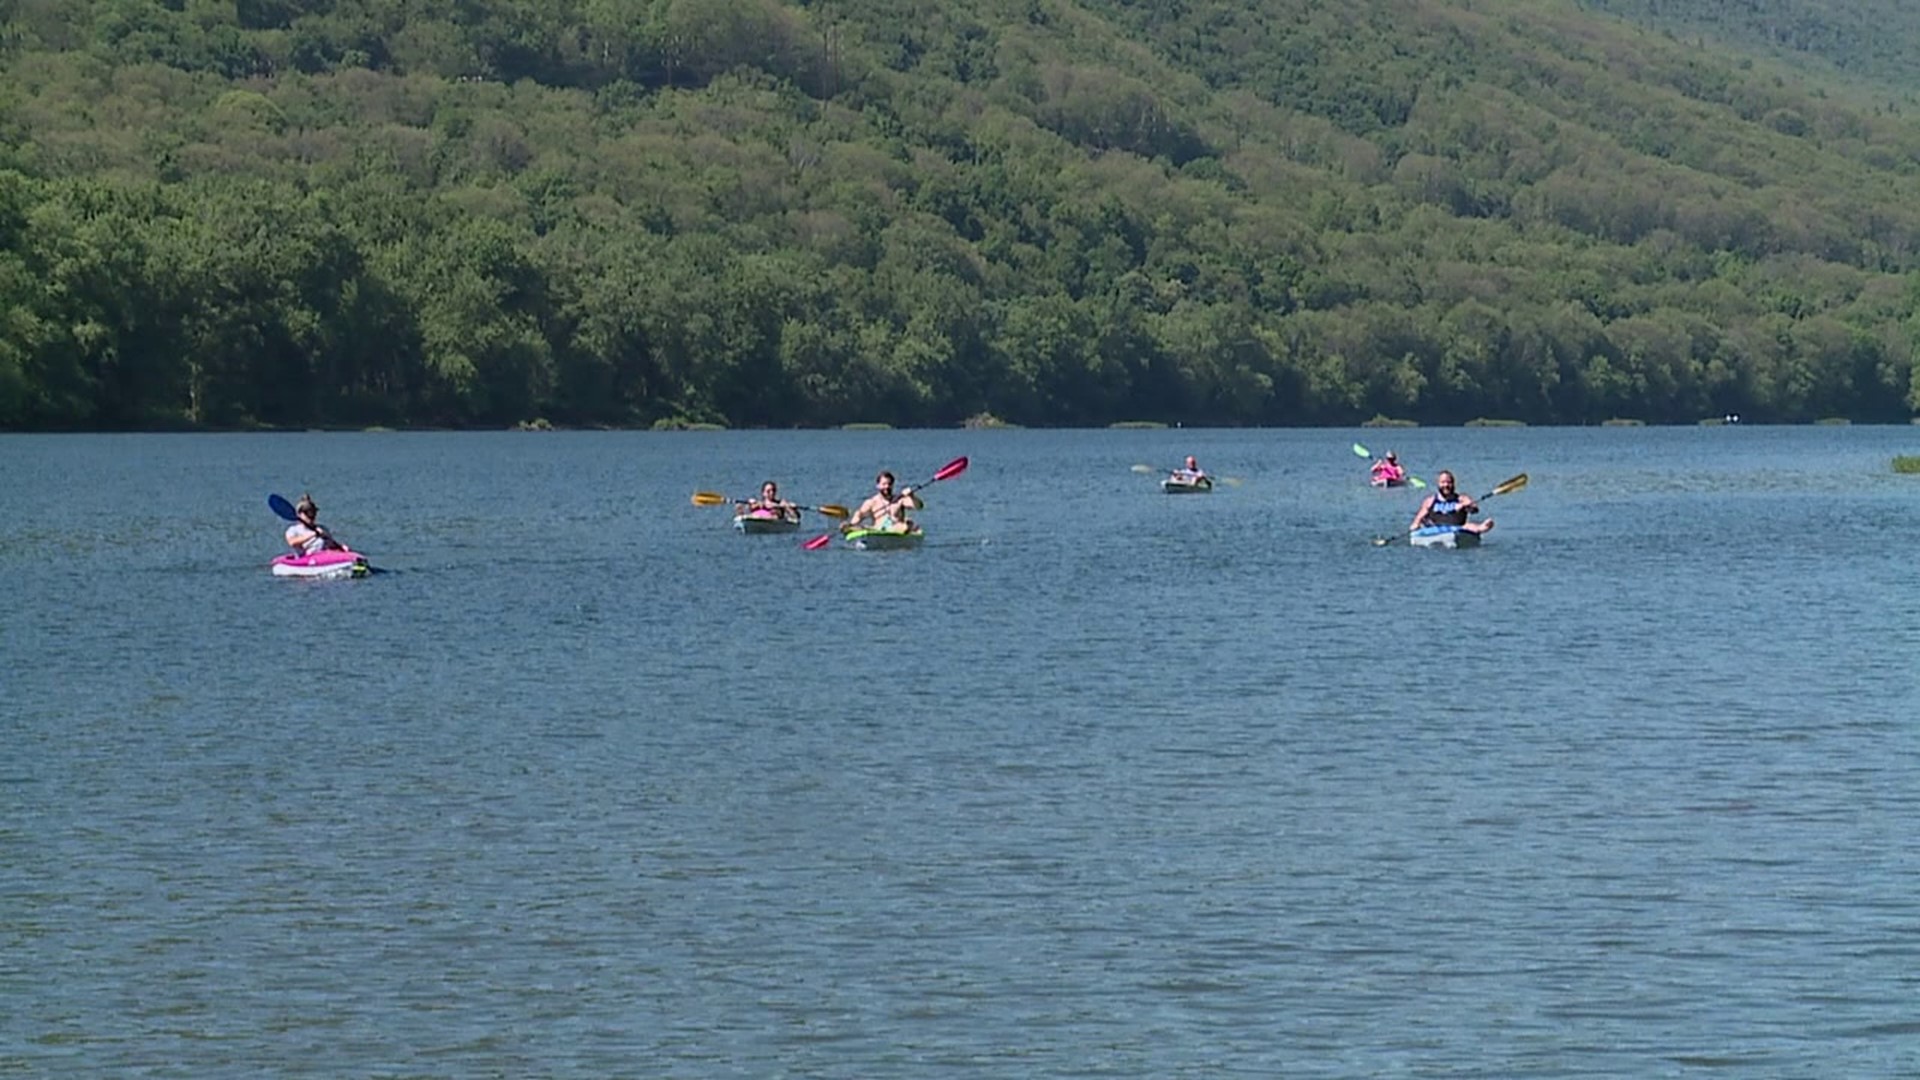 People in central Pennsylvania celebrated Independence Day out on the water.